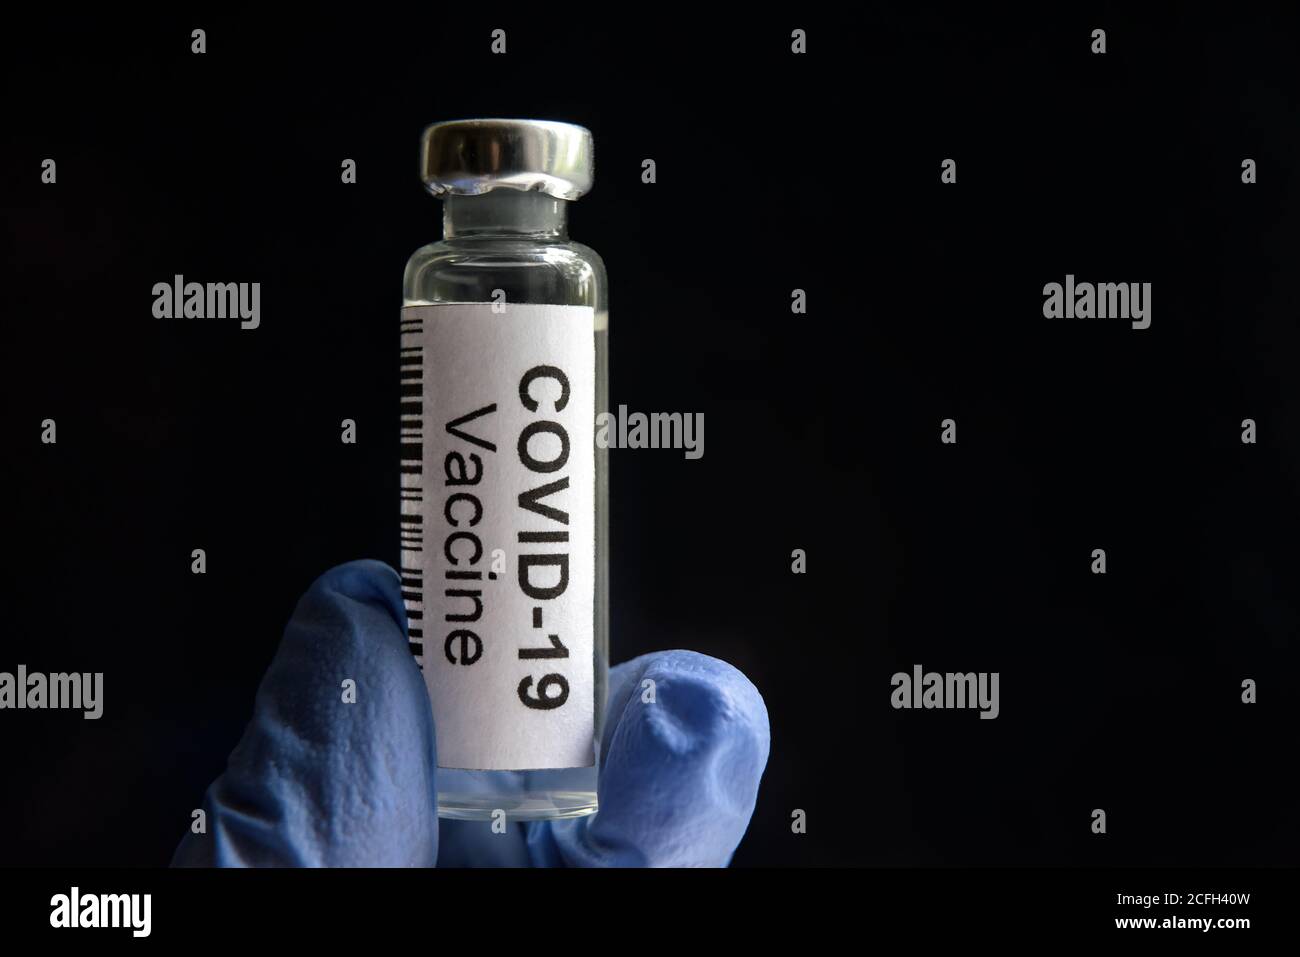 COVID-19 vaccine on black background, medication bottle for SARS-CoV-2 corona virus cure. Modern coronavirus drug in hands close-up. Concept of medici Stock Photo